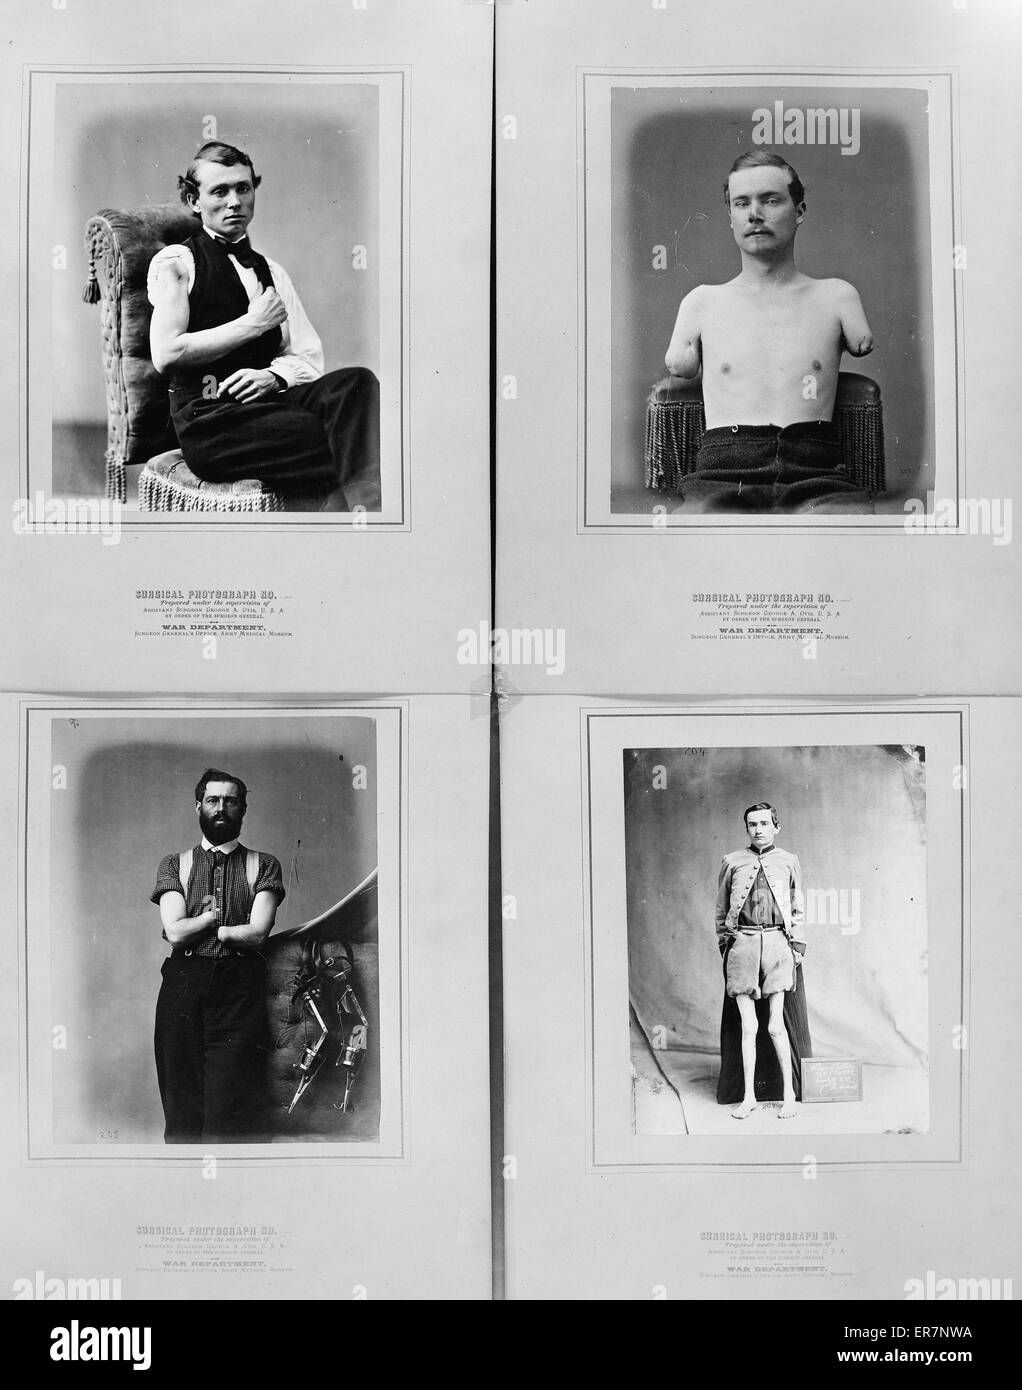 Surgical photograph  prepared under the supervision of  War Department, Surgeon General's Office, Army Medical Museum. Photographs show men displaying the wounds received during the Civil War. Upper left: John Brink, Private, Company K, 11th Pennsylvania Stock Photo